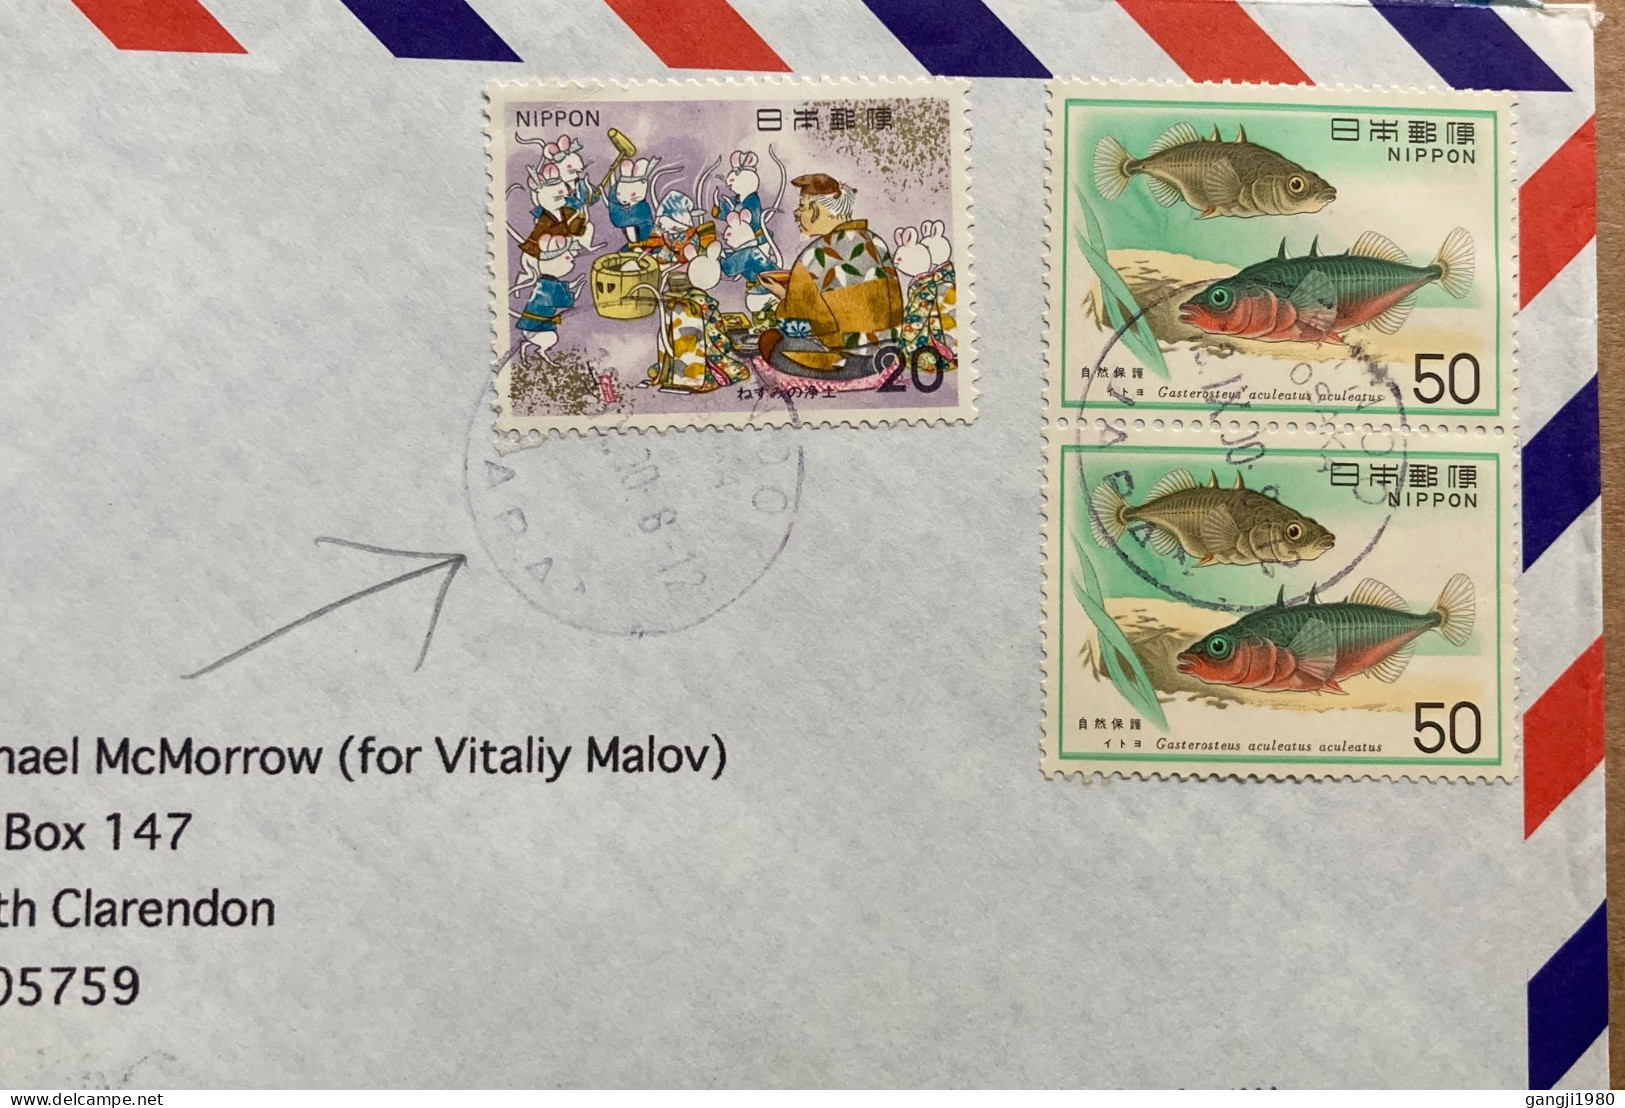 JAPAN 1980, COVER USED TO USA, DISNEY, MICKY MOUSE, FAIRY TALE, CHILDREN STORIES, FISH, 3 STAMP, MINO CITY CANCEL. - Covers & Documents